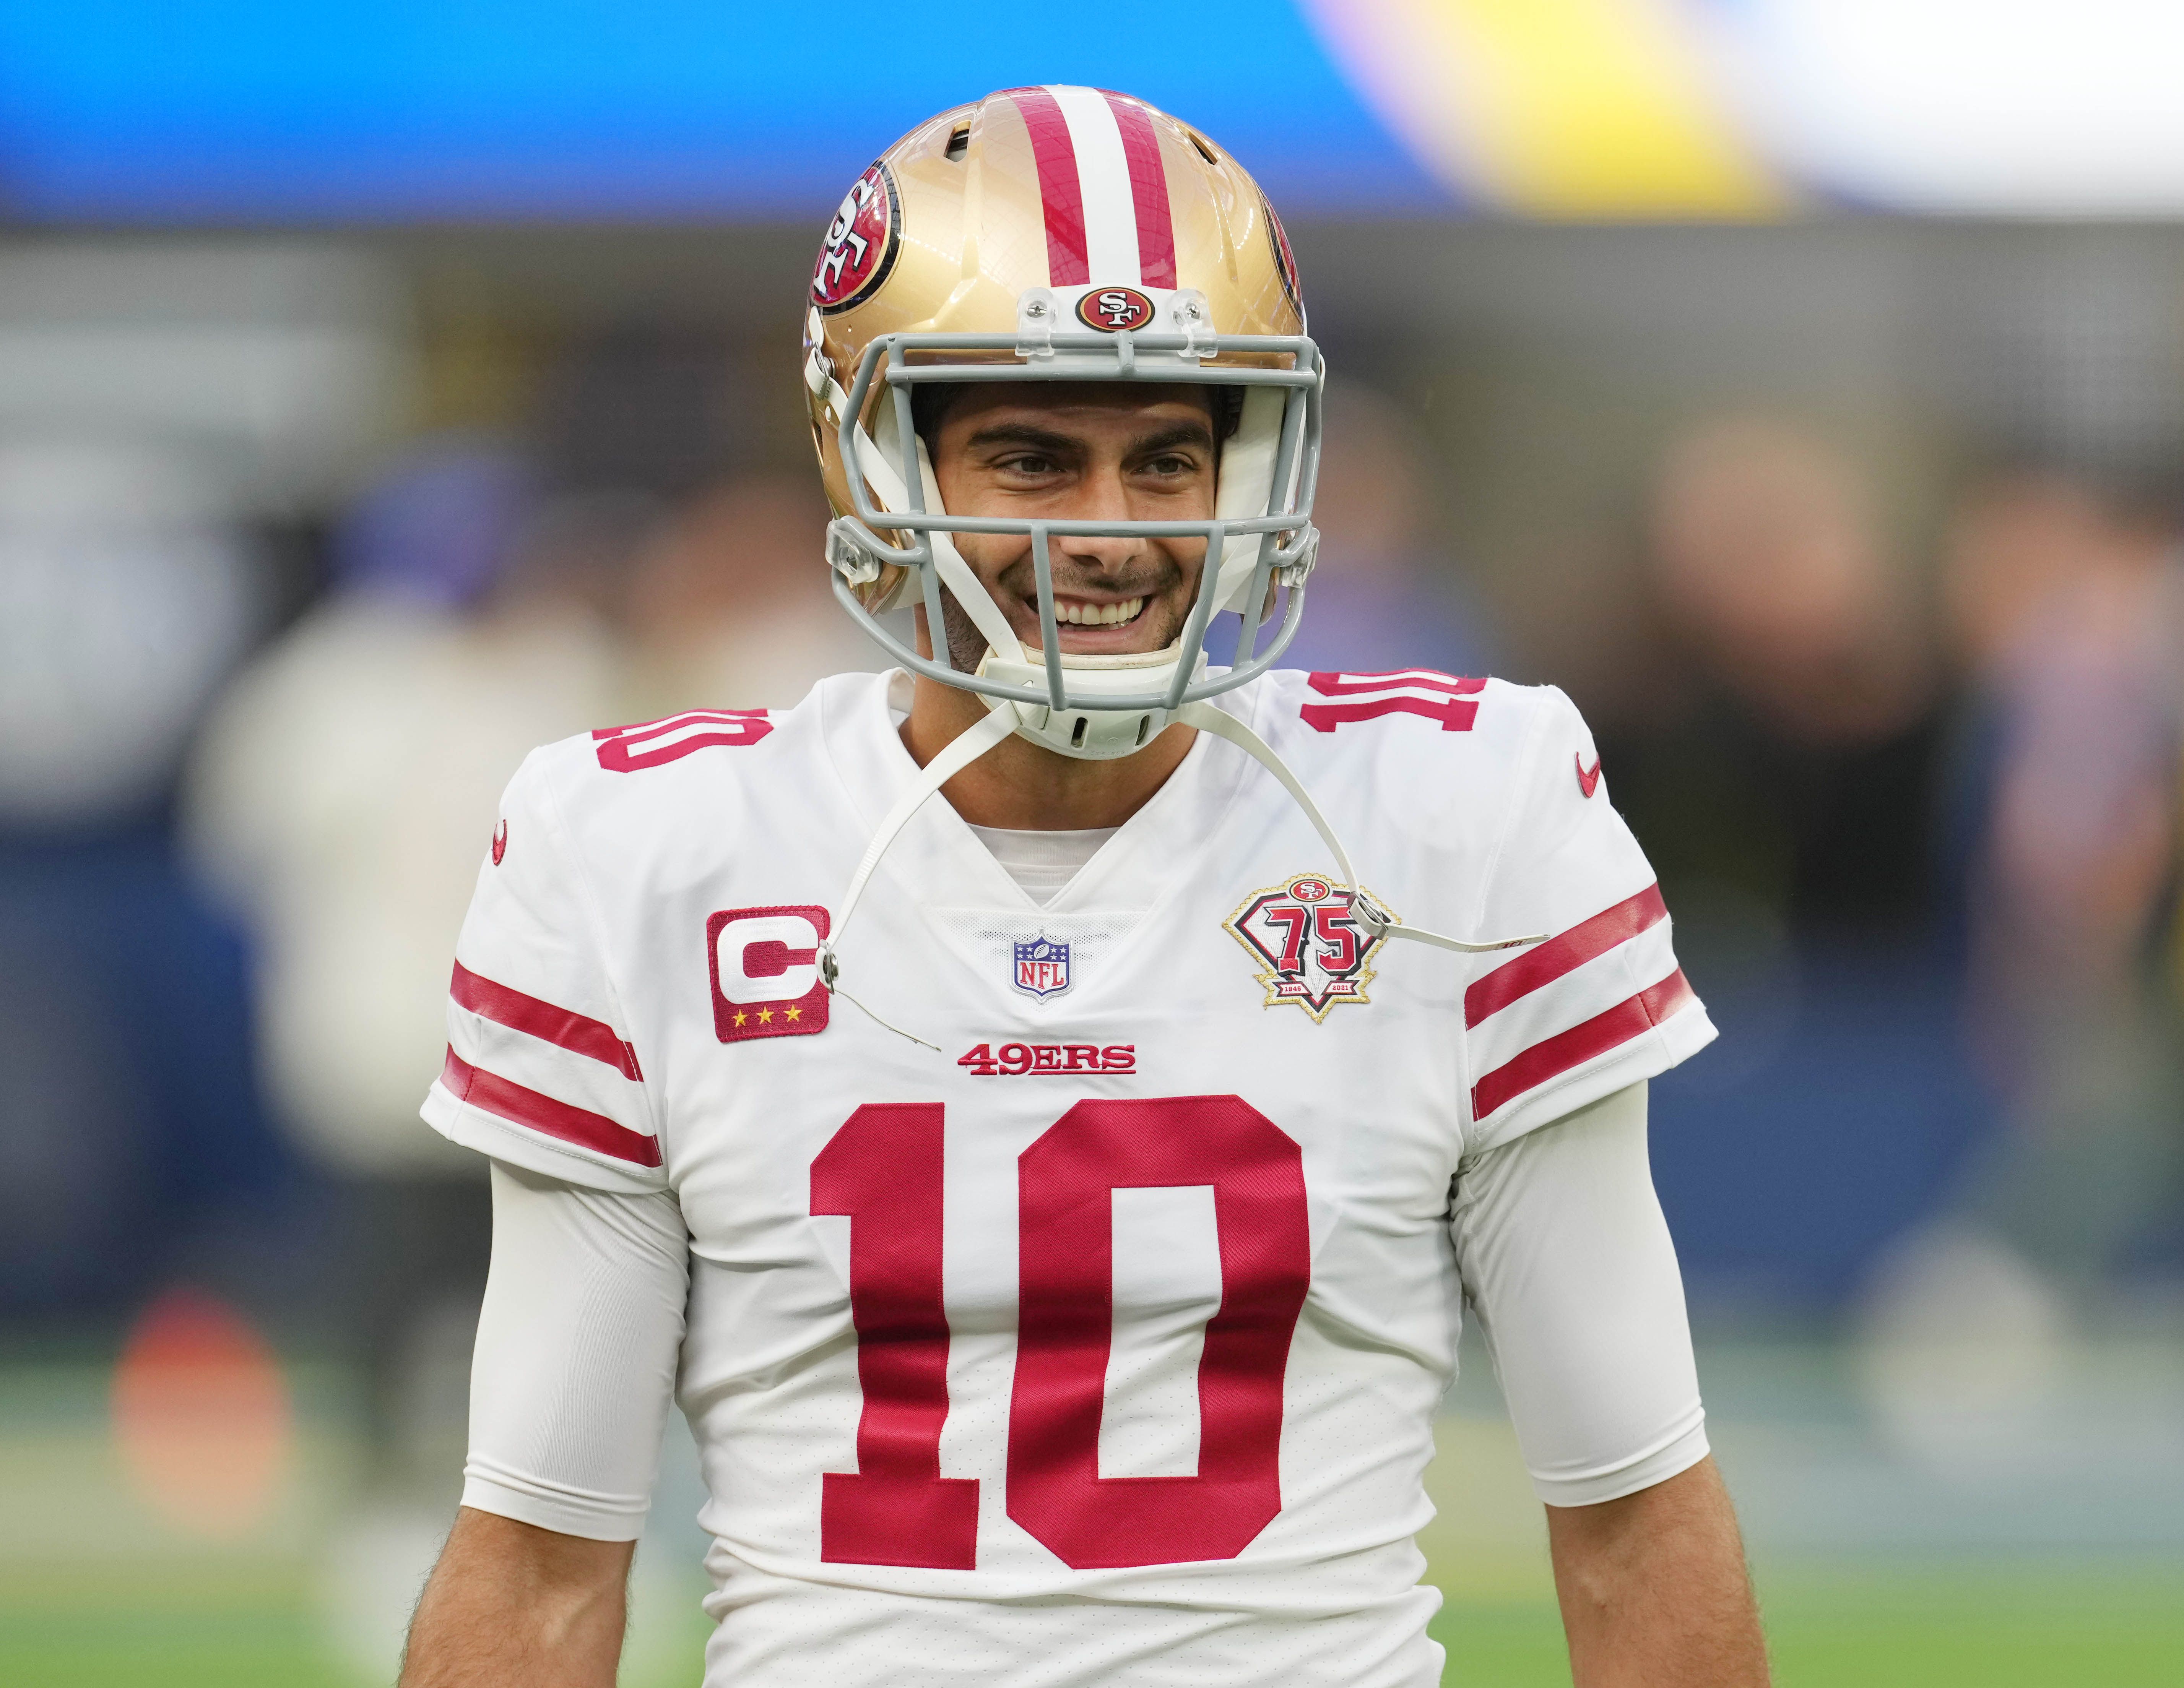 Jimmy G smiling